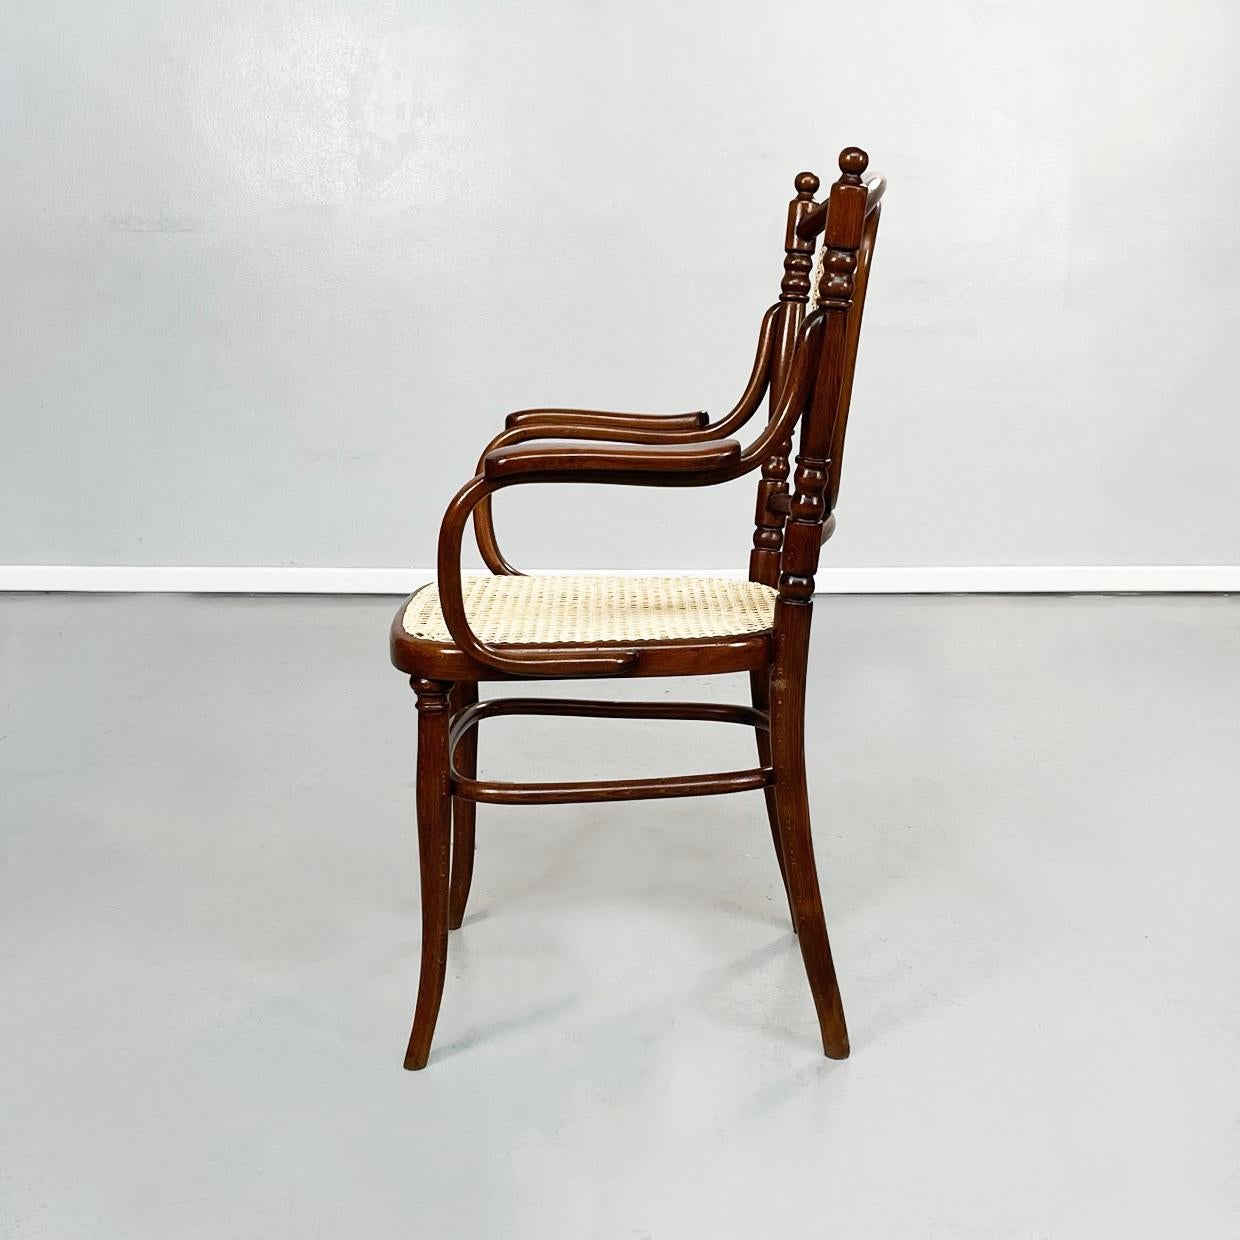 Vienna Secession Austrian Chairs with Straw and Wood by Thonet, 1900s For Sale